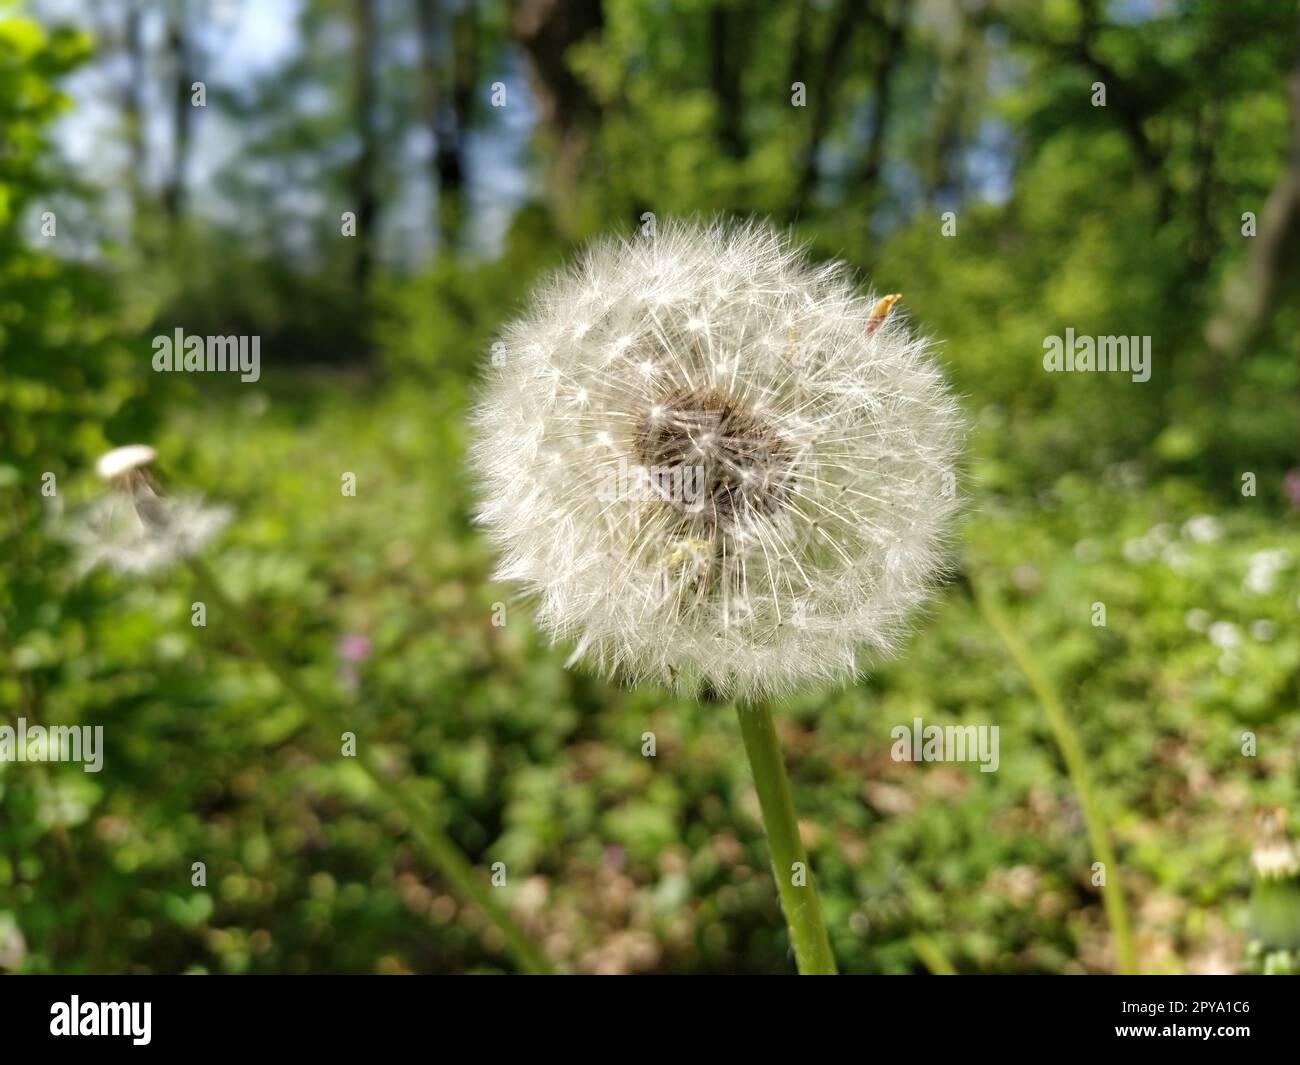 White dandelion with seeds. Forest lawn with melliferous plants. Lawn with flowers. Fluffy sphere or ball. Close up Stock Photo